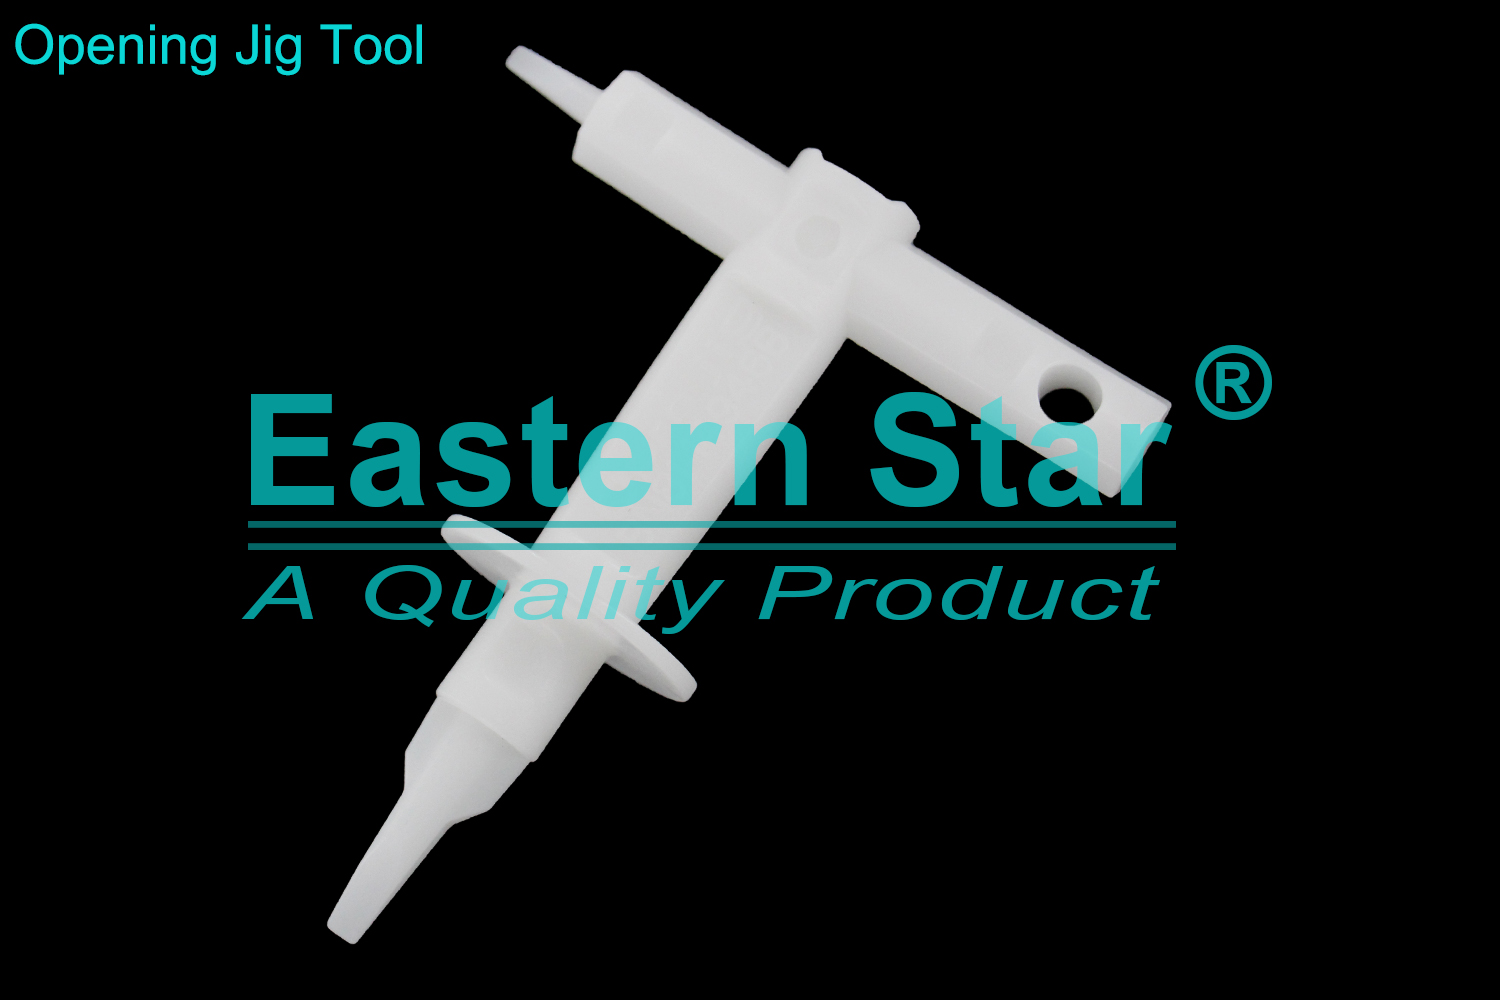 ES-JIG-001 TV Monitor Opening Jig Tool for Samsung TV no-screw rear back covers Dismantling tools BN81-12946 (1)